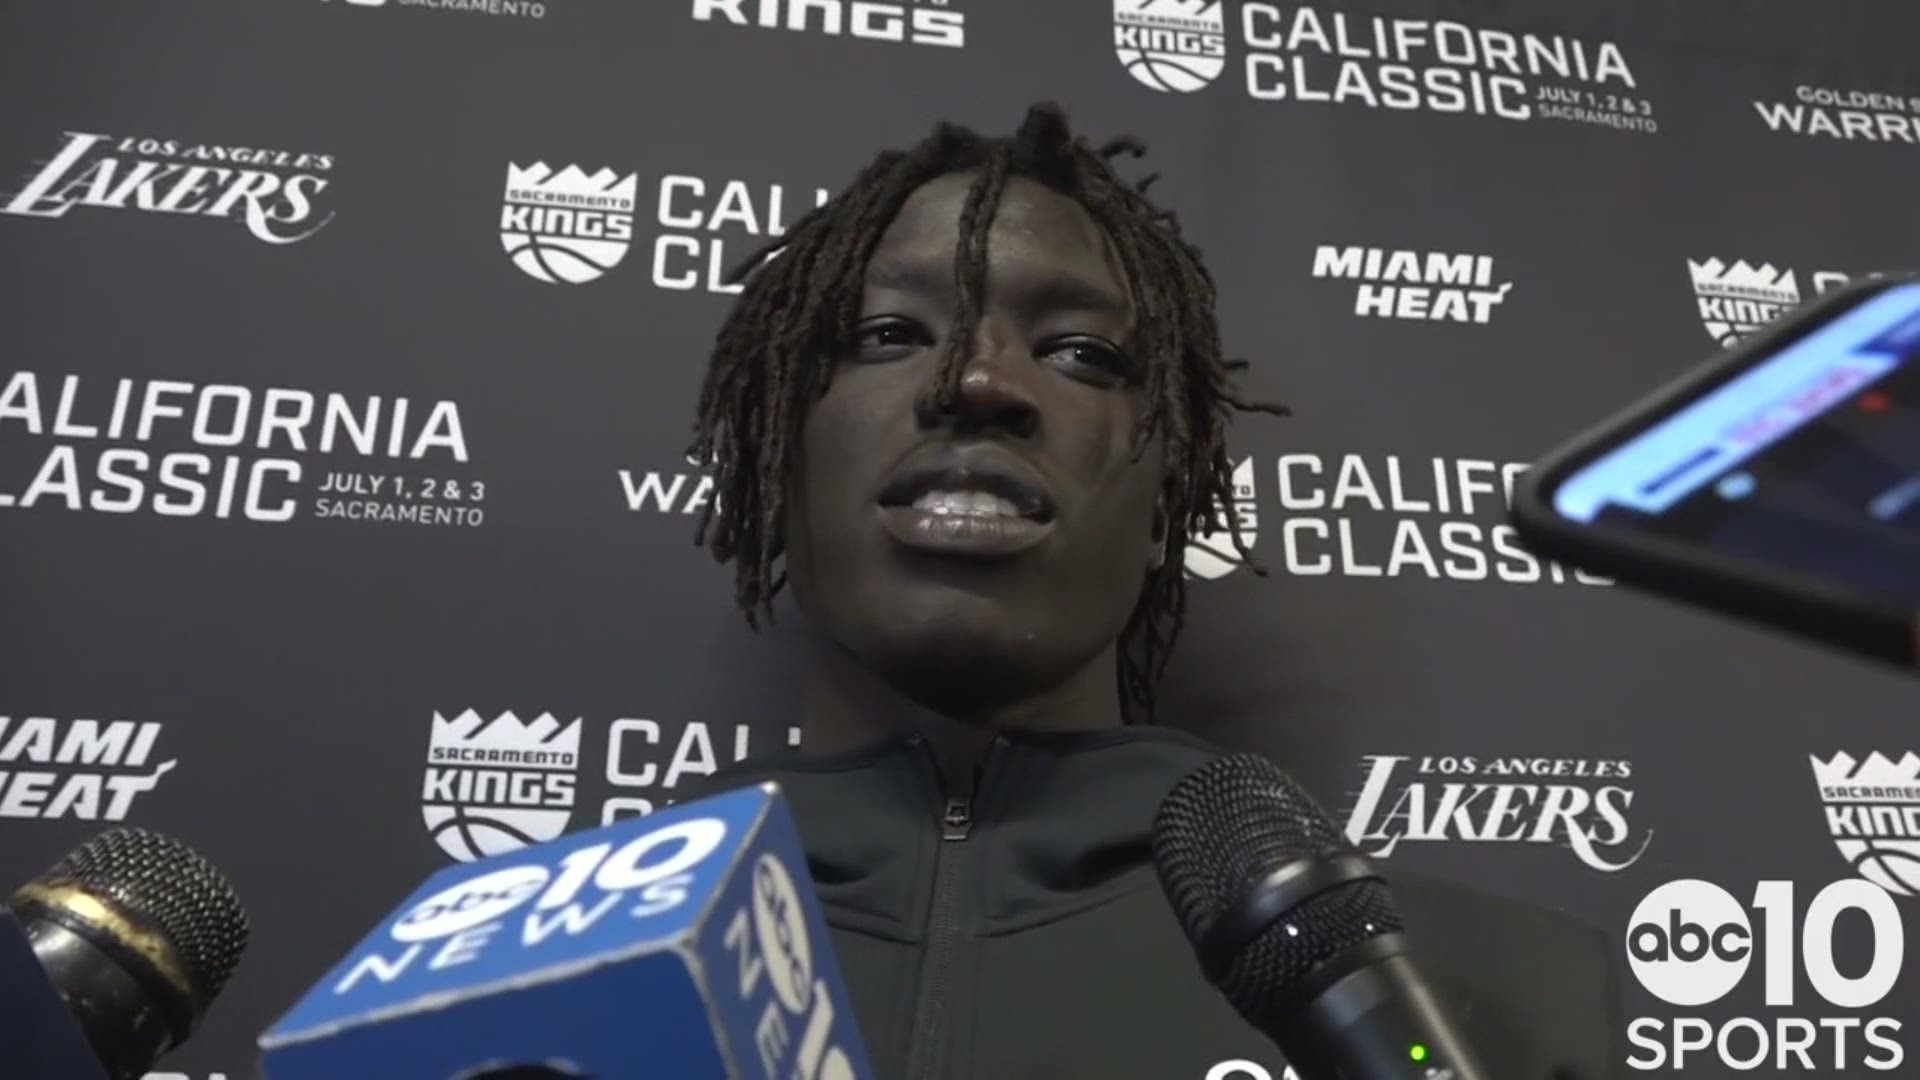 Kings forward Wenyen Gabriel talks about his double-double performance in Monday's victory over the Golden State Warriors to tip-off the California Classic at Golden 1 Center, what tonight's big outing does for his confidence and how different summer league with Sacramento feels this year compared to last season.